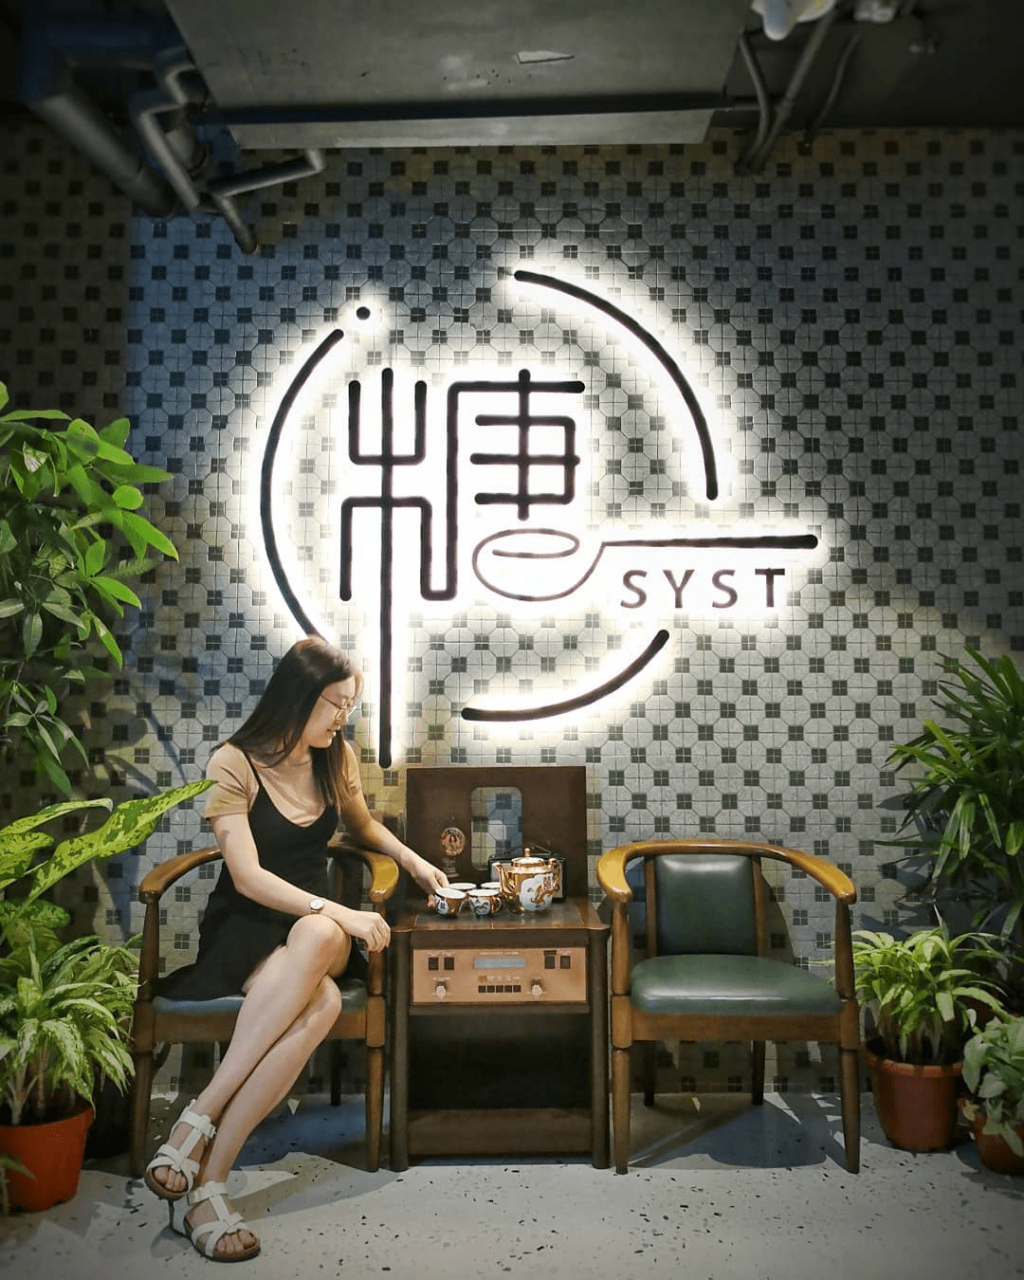 SYST - furniture photo spot